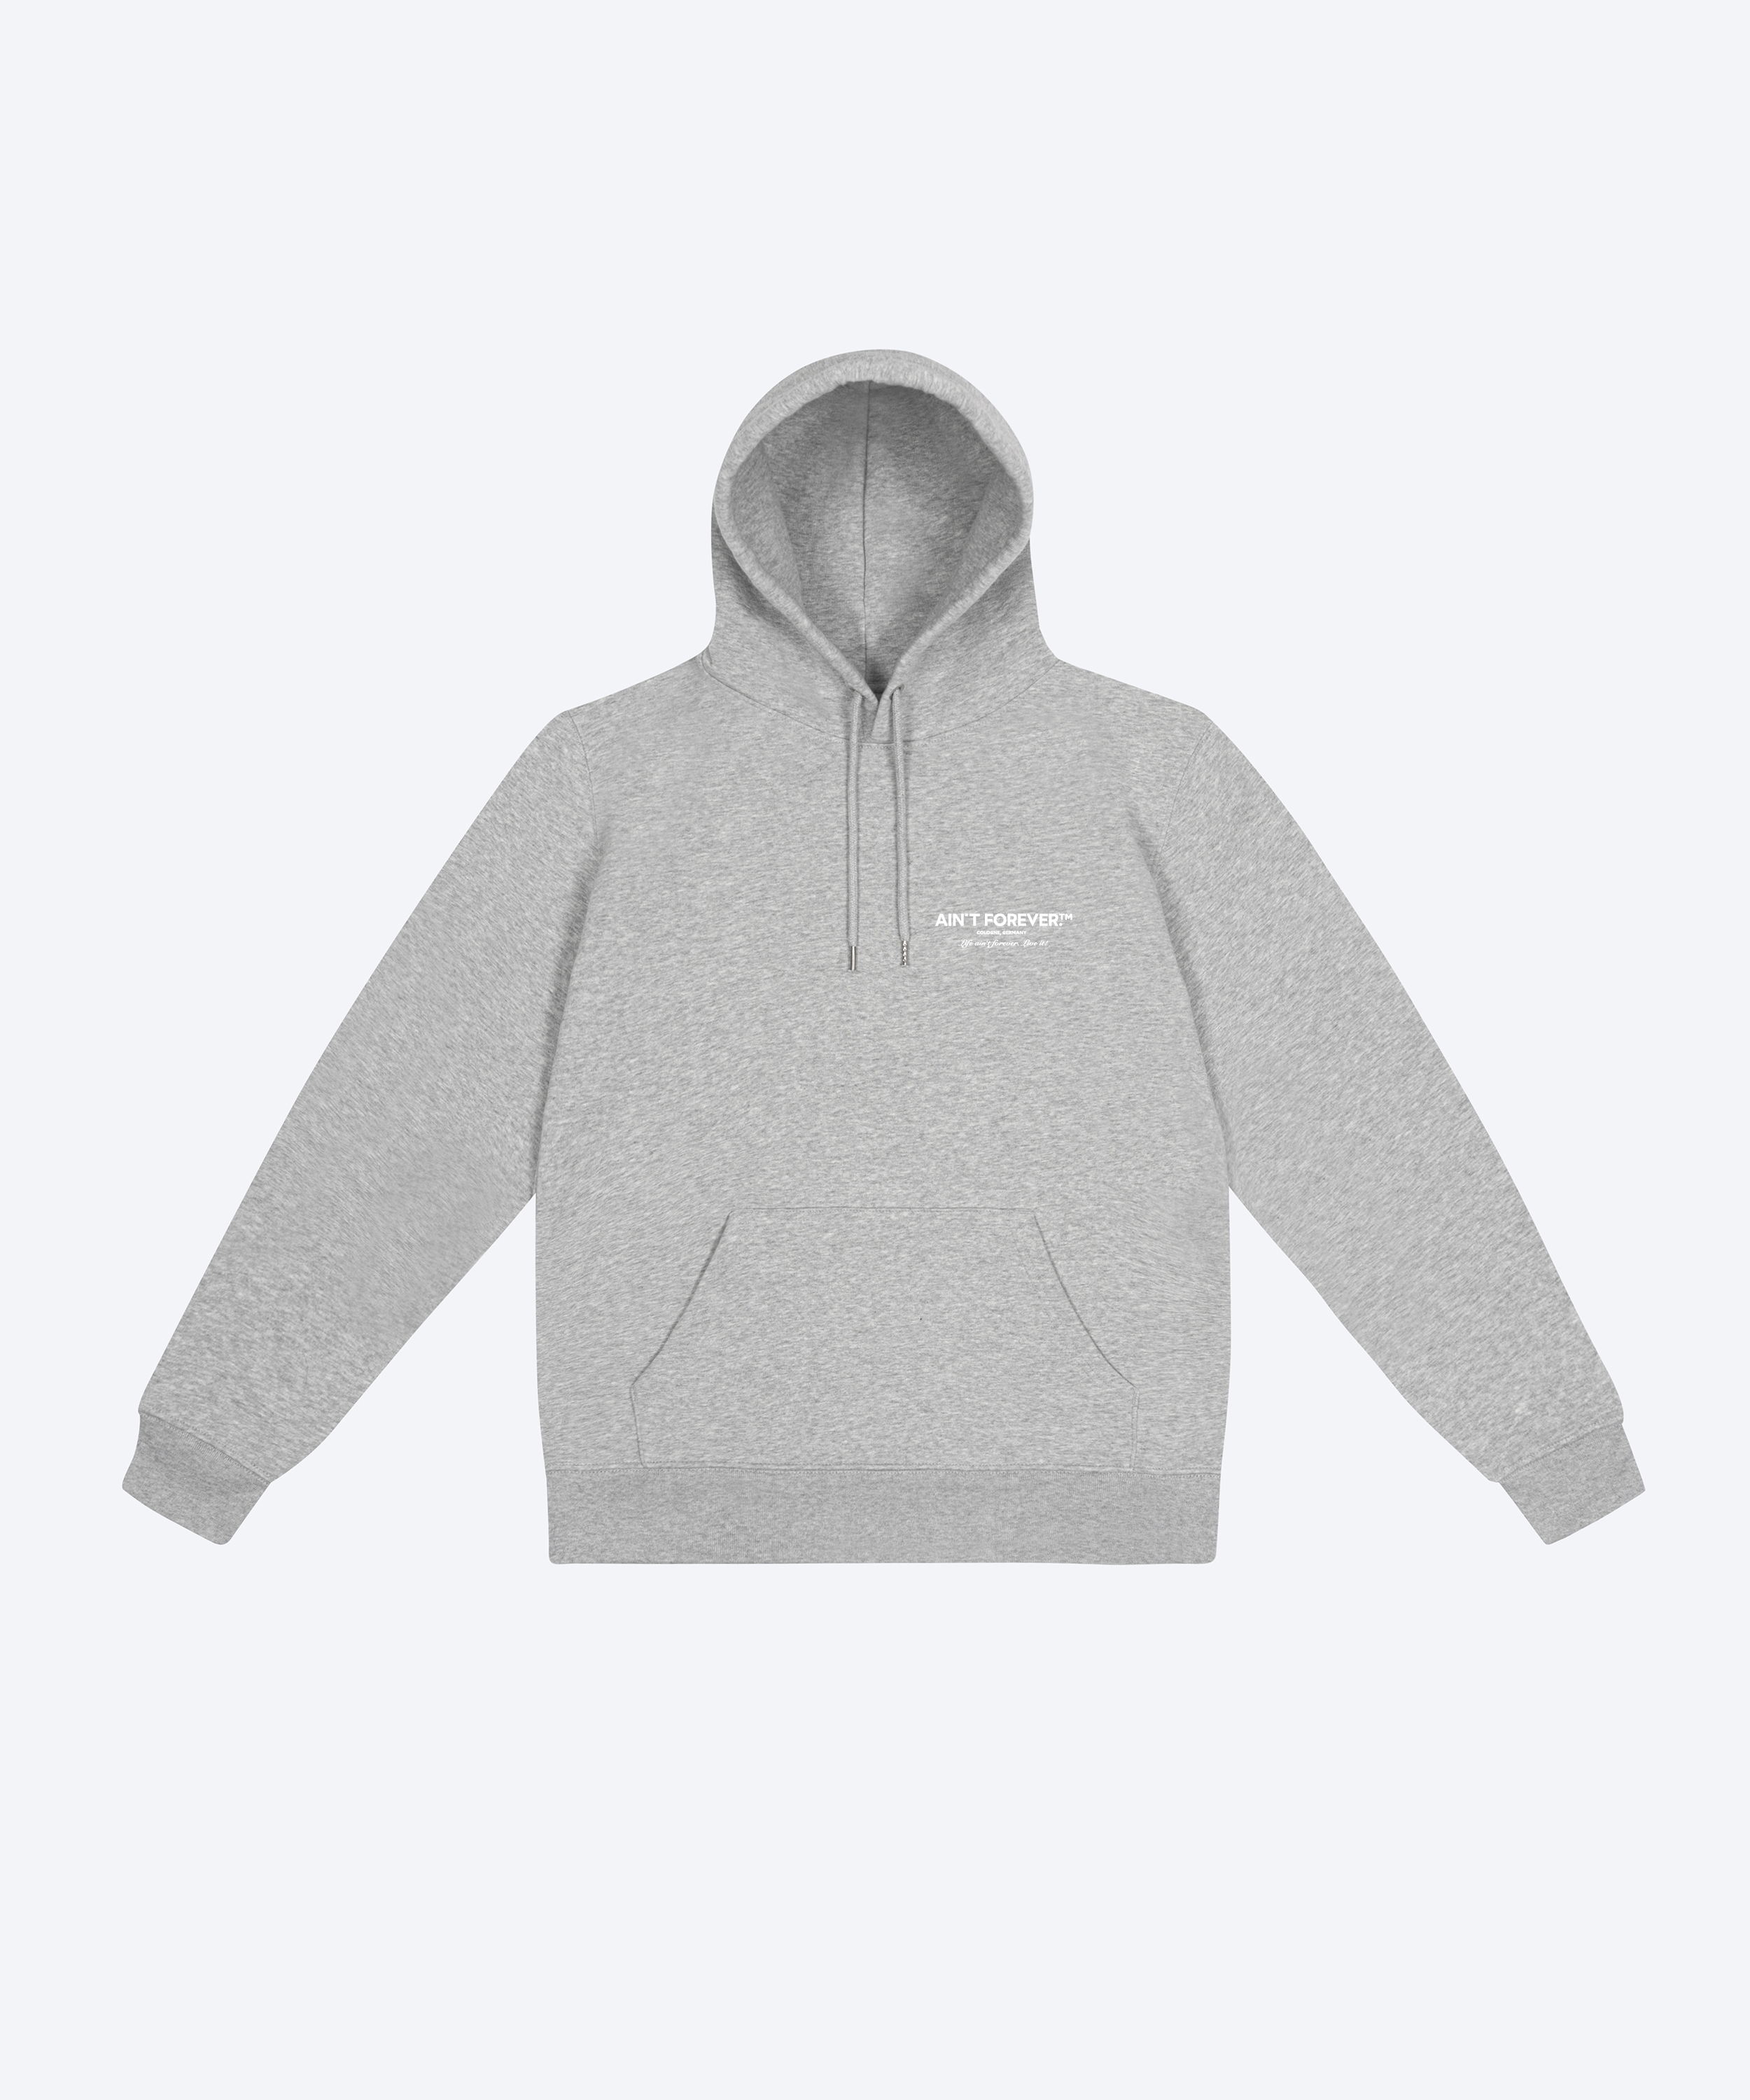 THE LIVE IT! HOODIE (HEATHER GREY / WHITE)